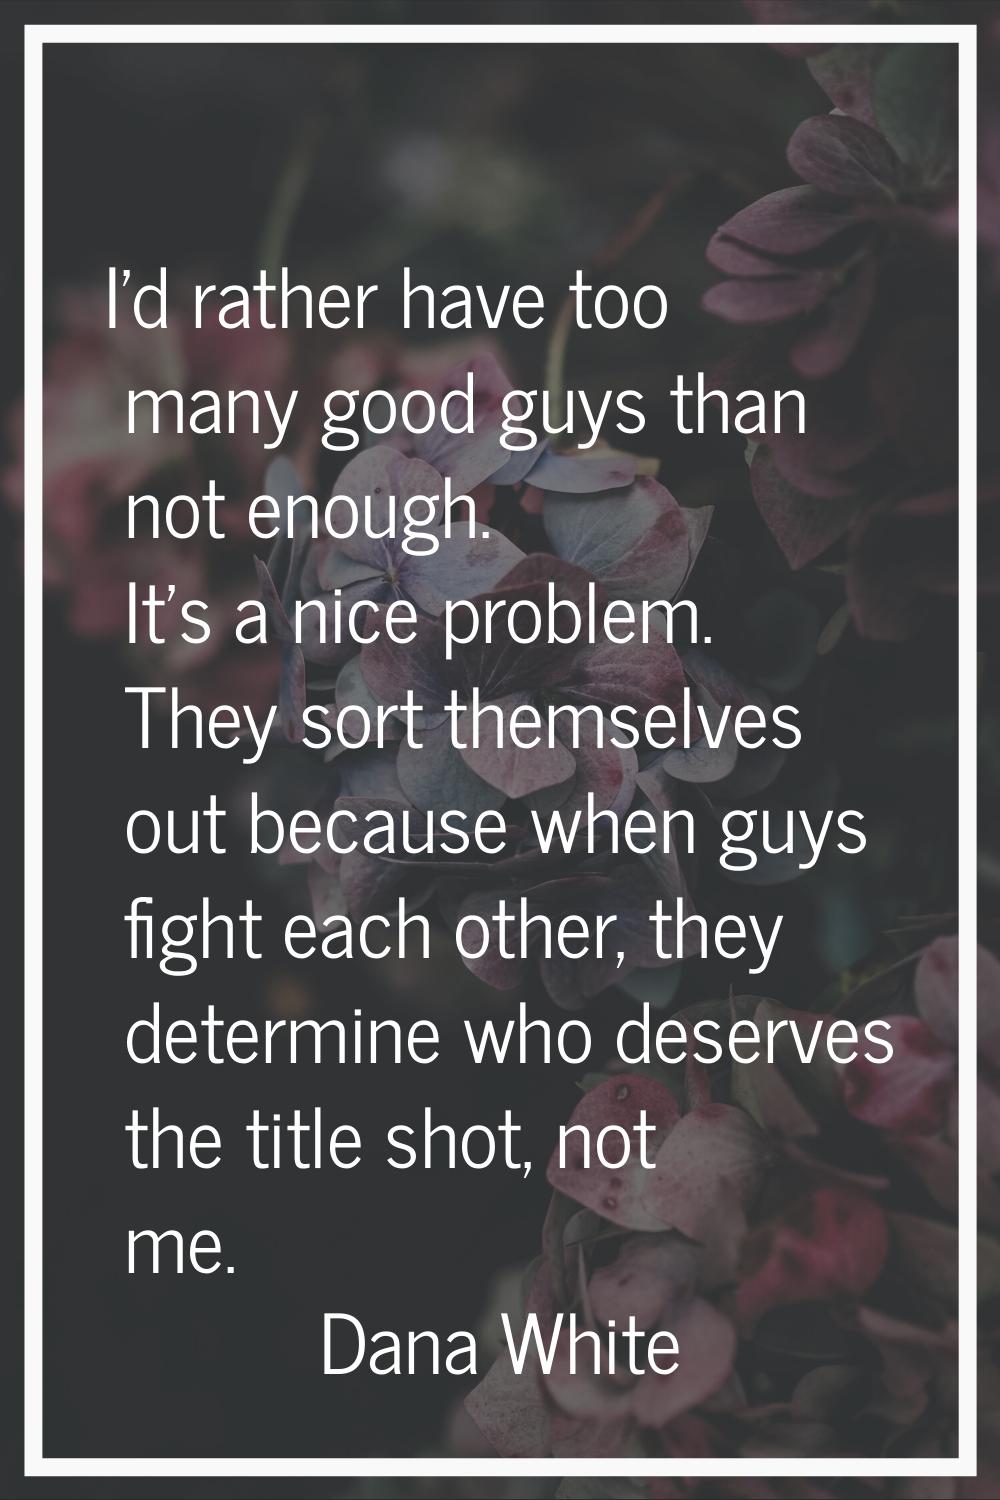 I'd rather have too many good guys than not enough. It's a nice problem. They sort themselves out b